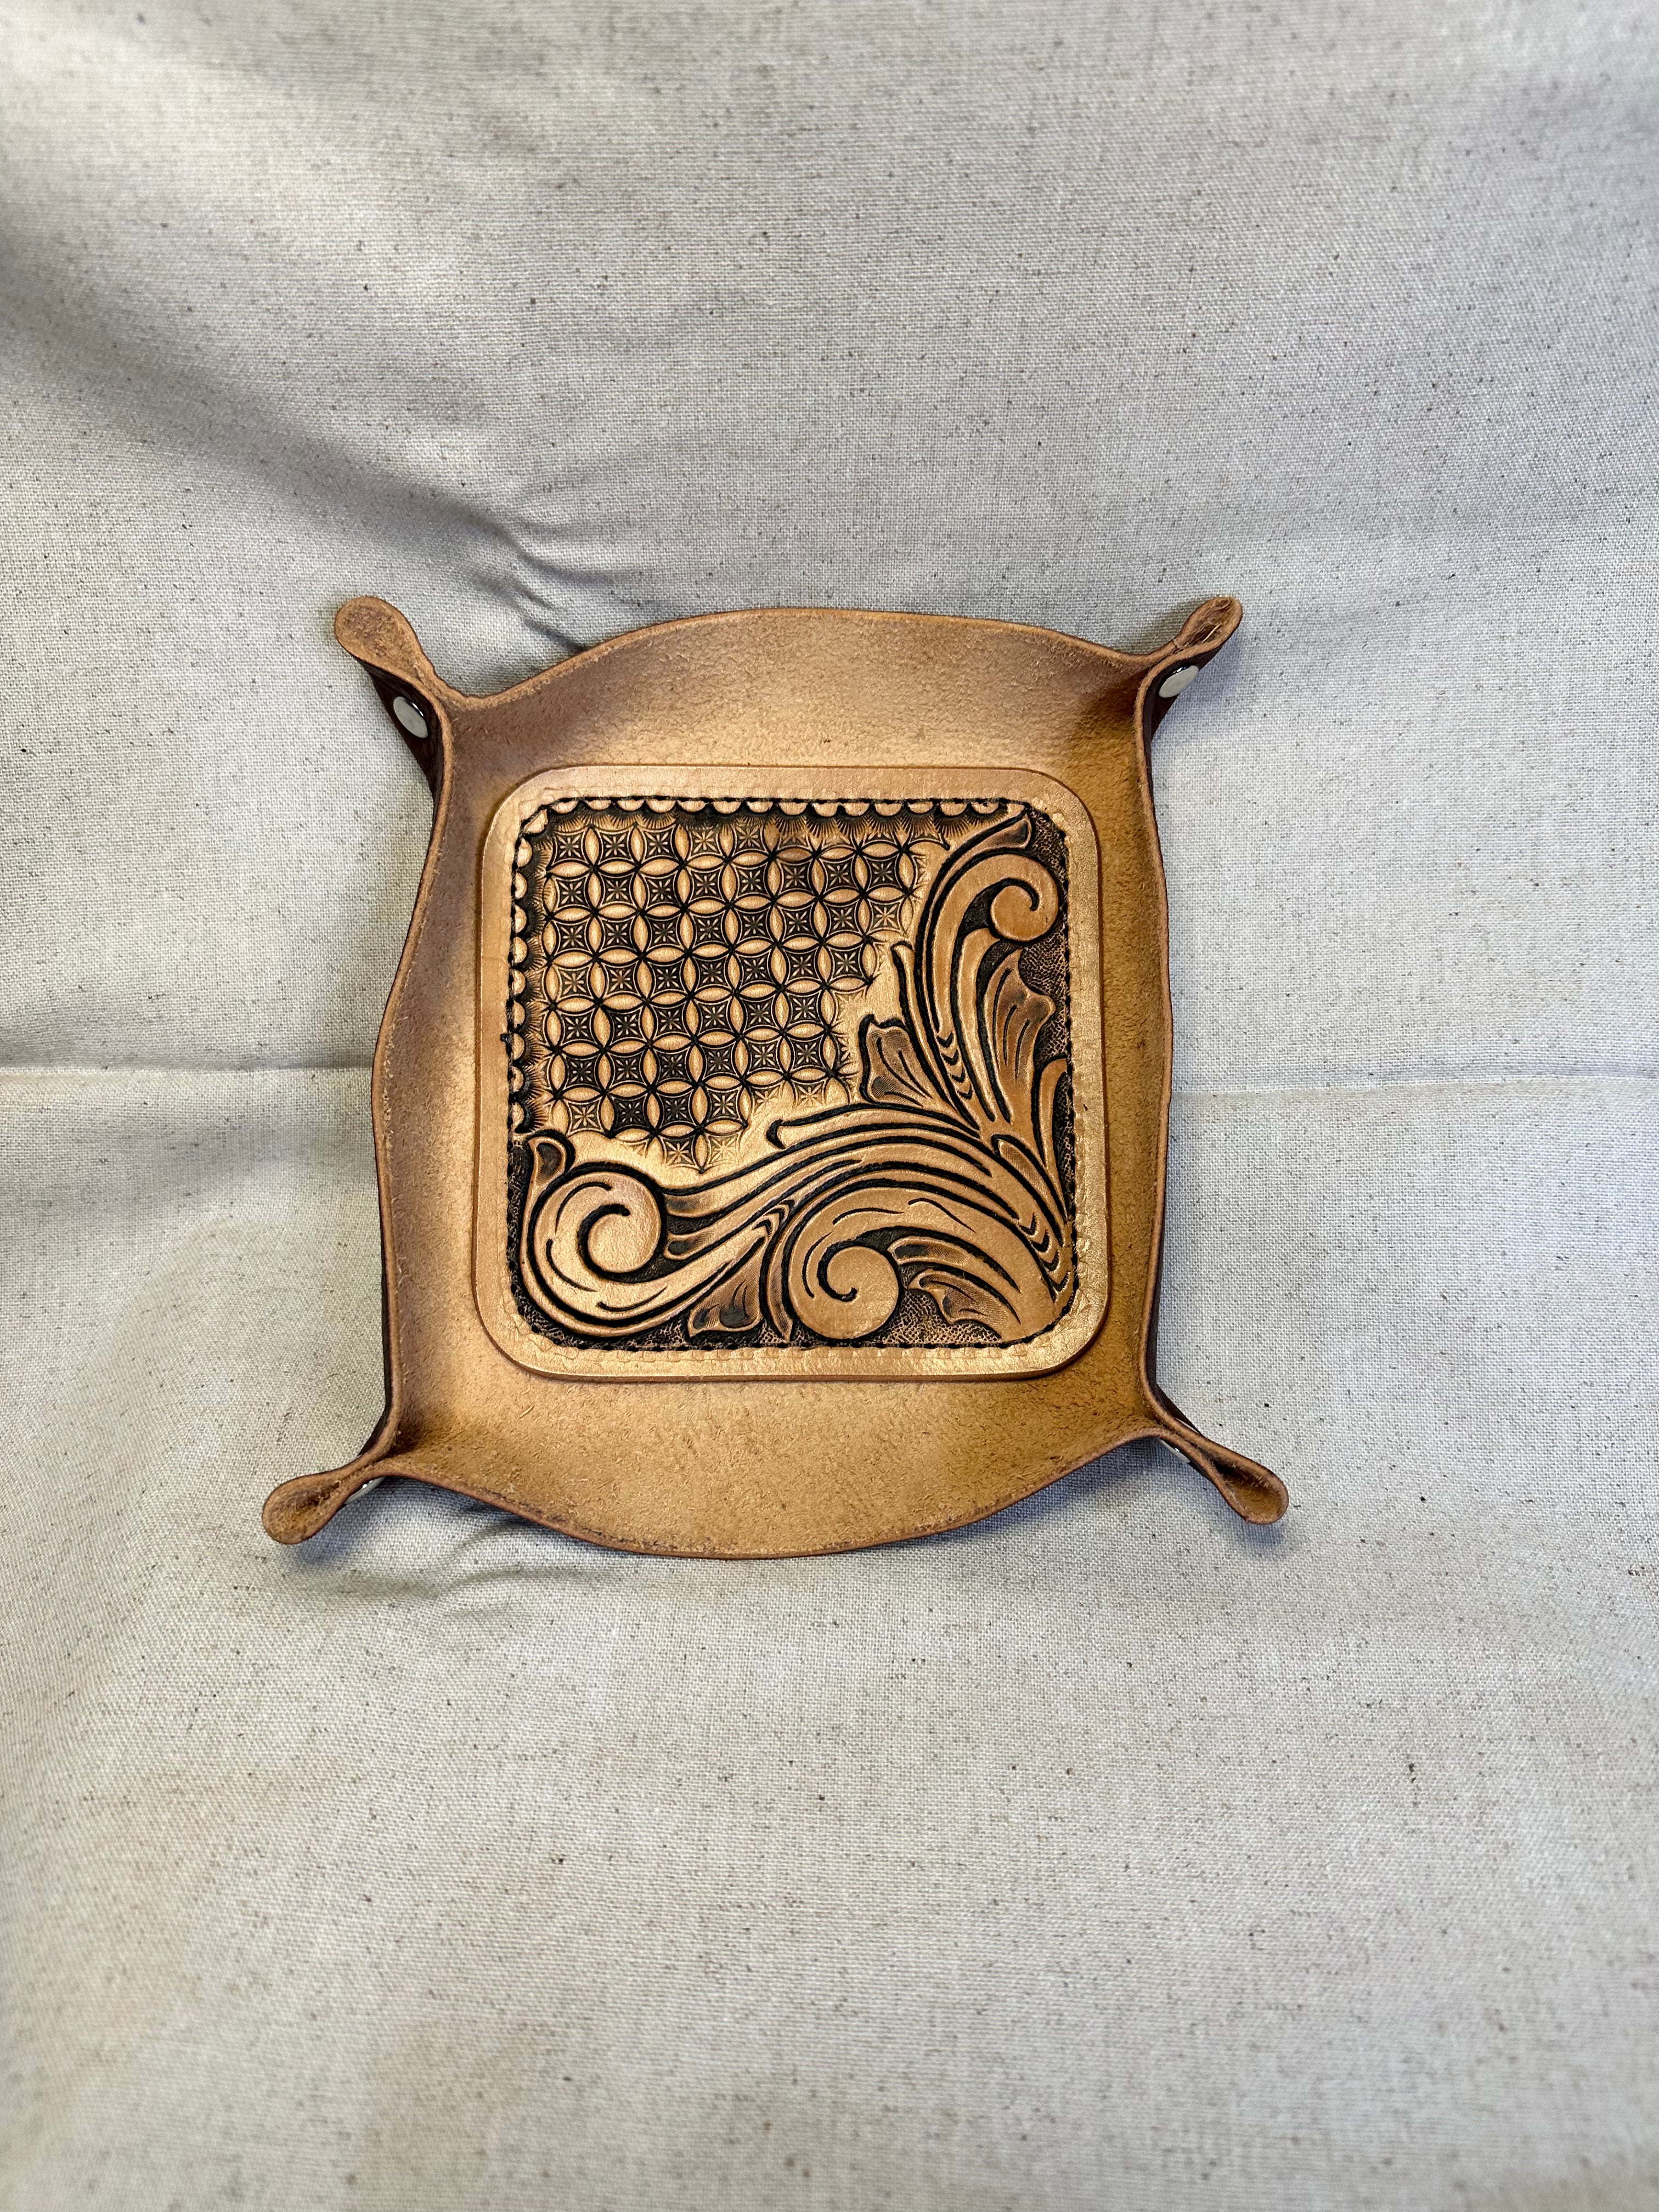 Valet Tray - Hand Tooled & Geometric Stamped